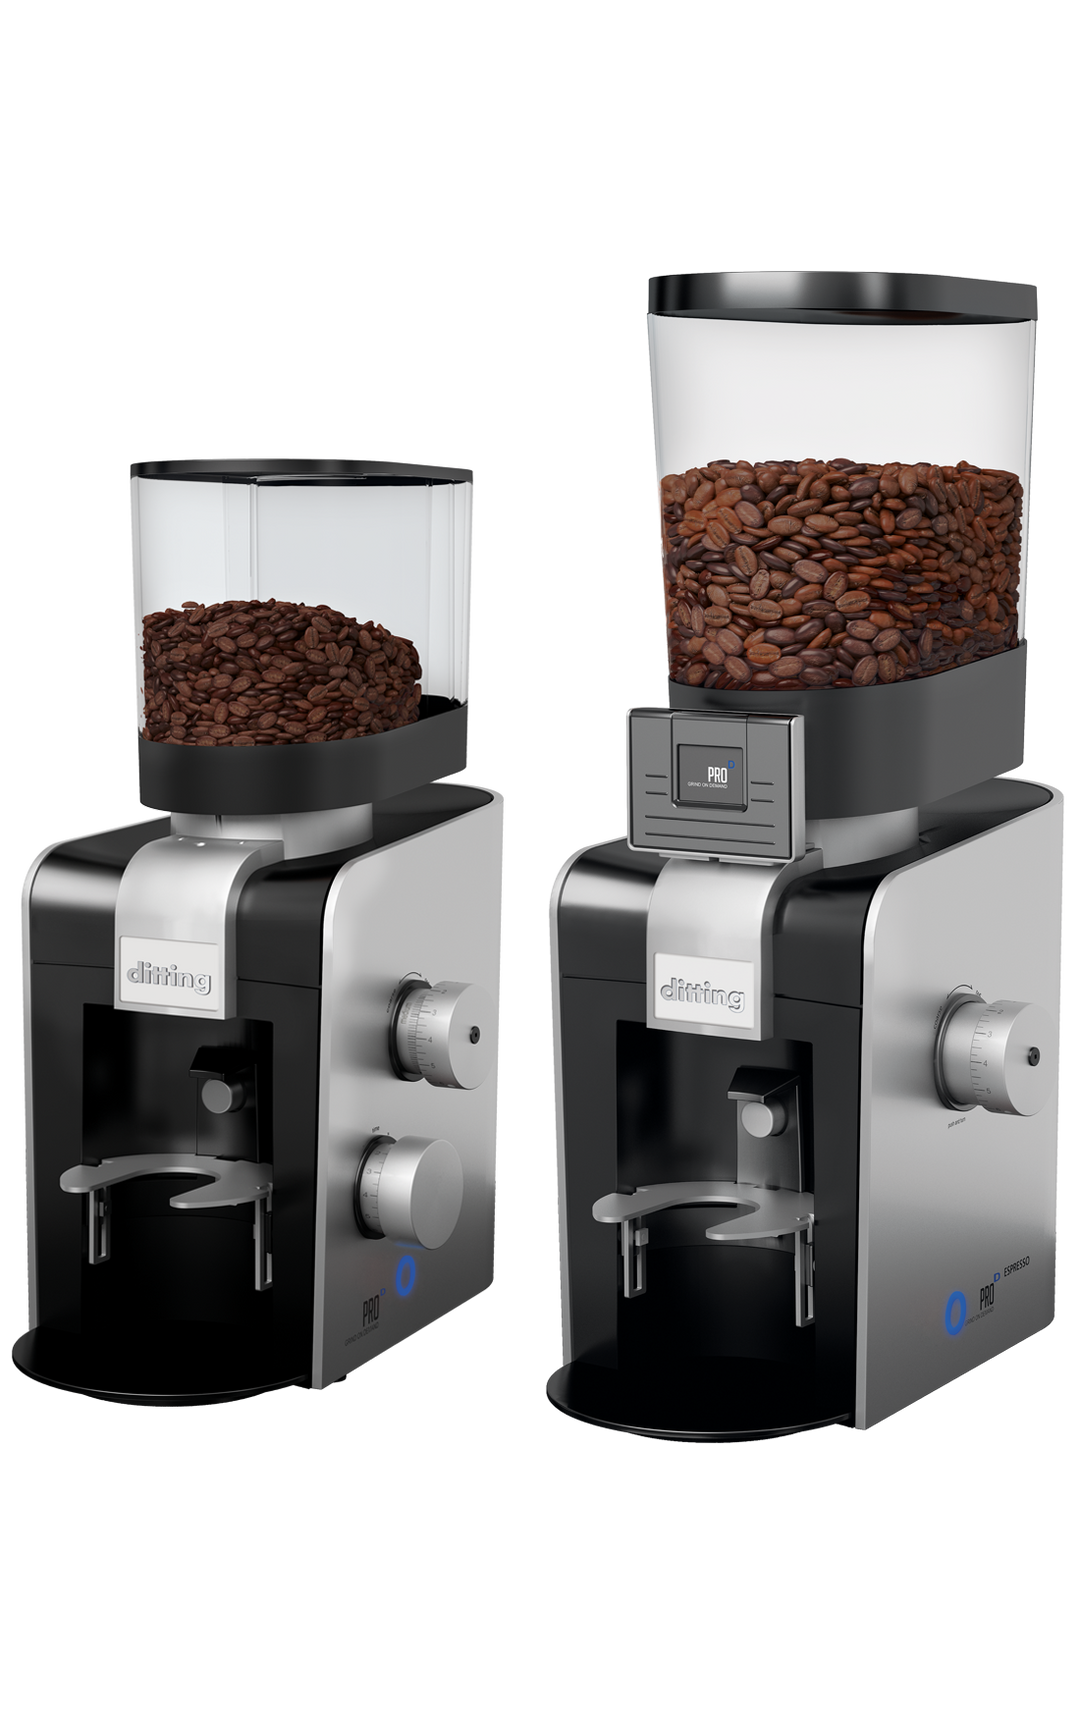 Ditting PROD Allround and Espresso grinders